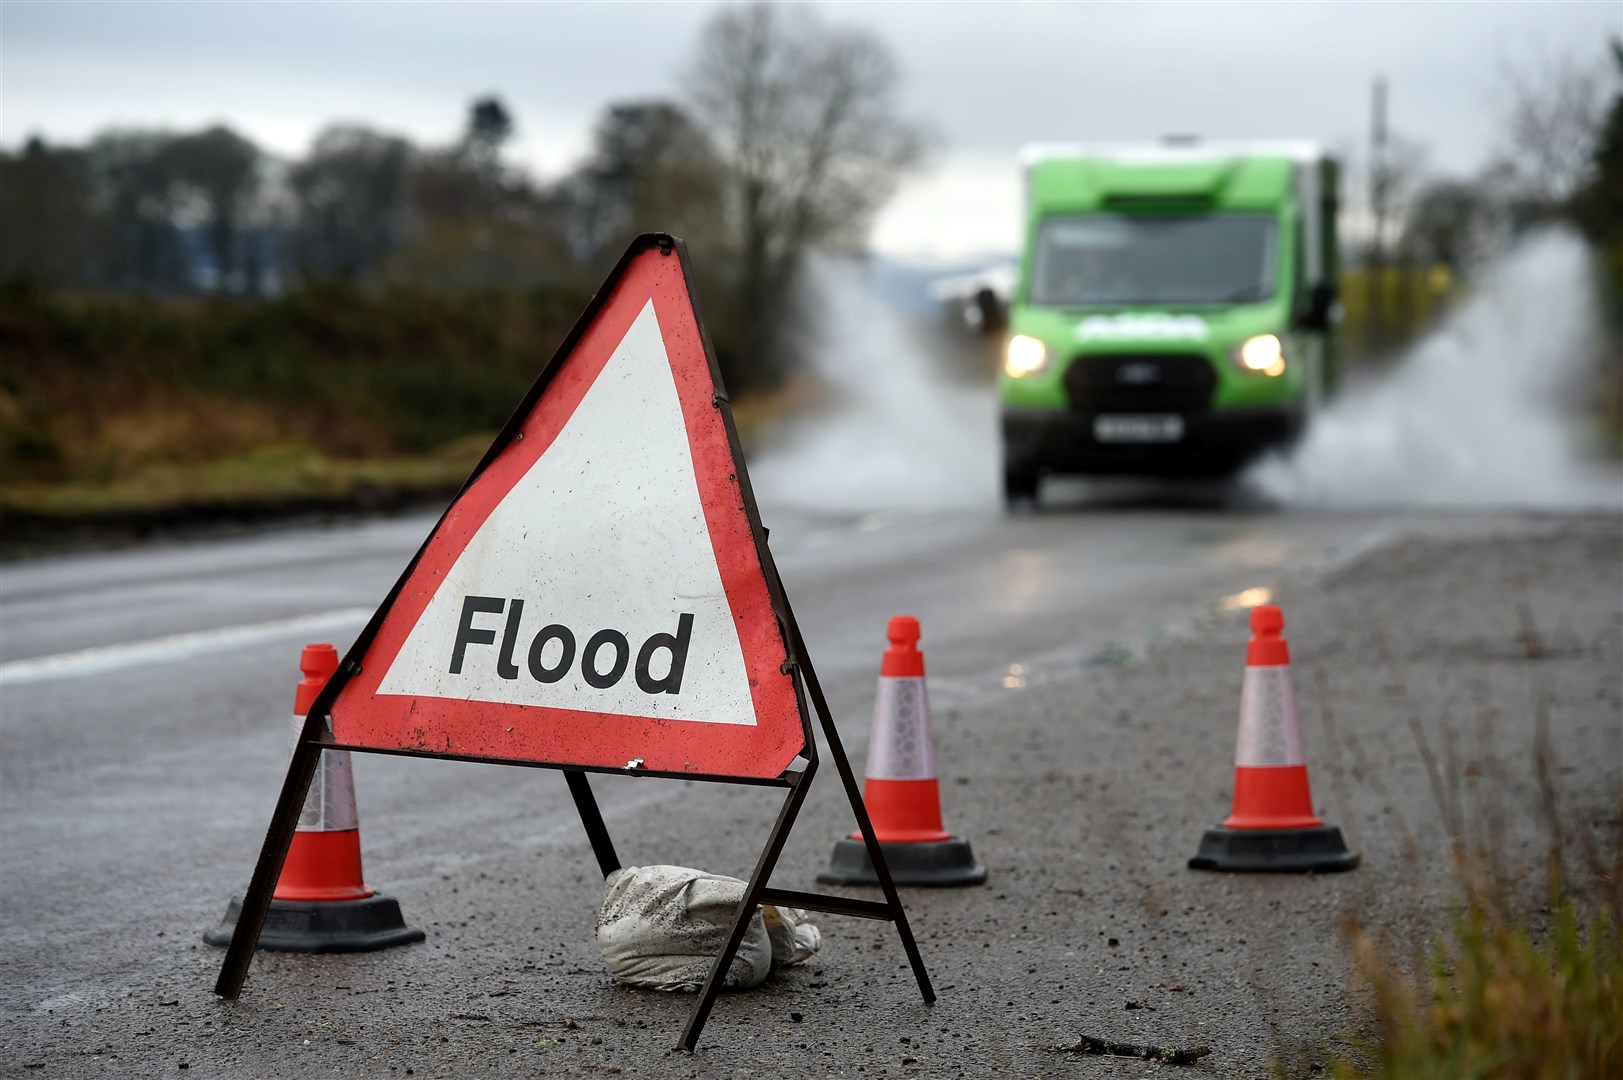 Large parts of the north are at risk of flooding.